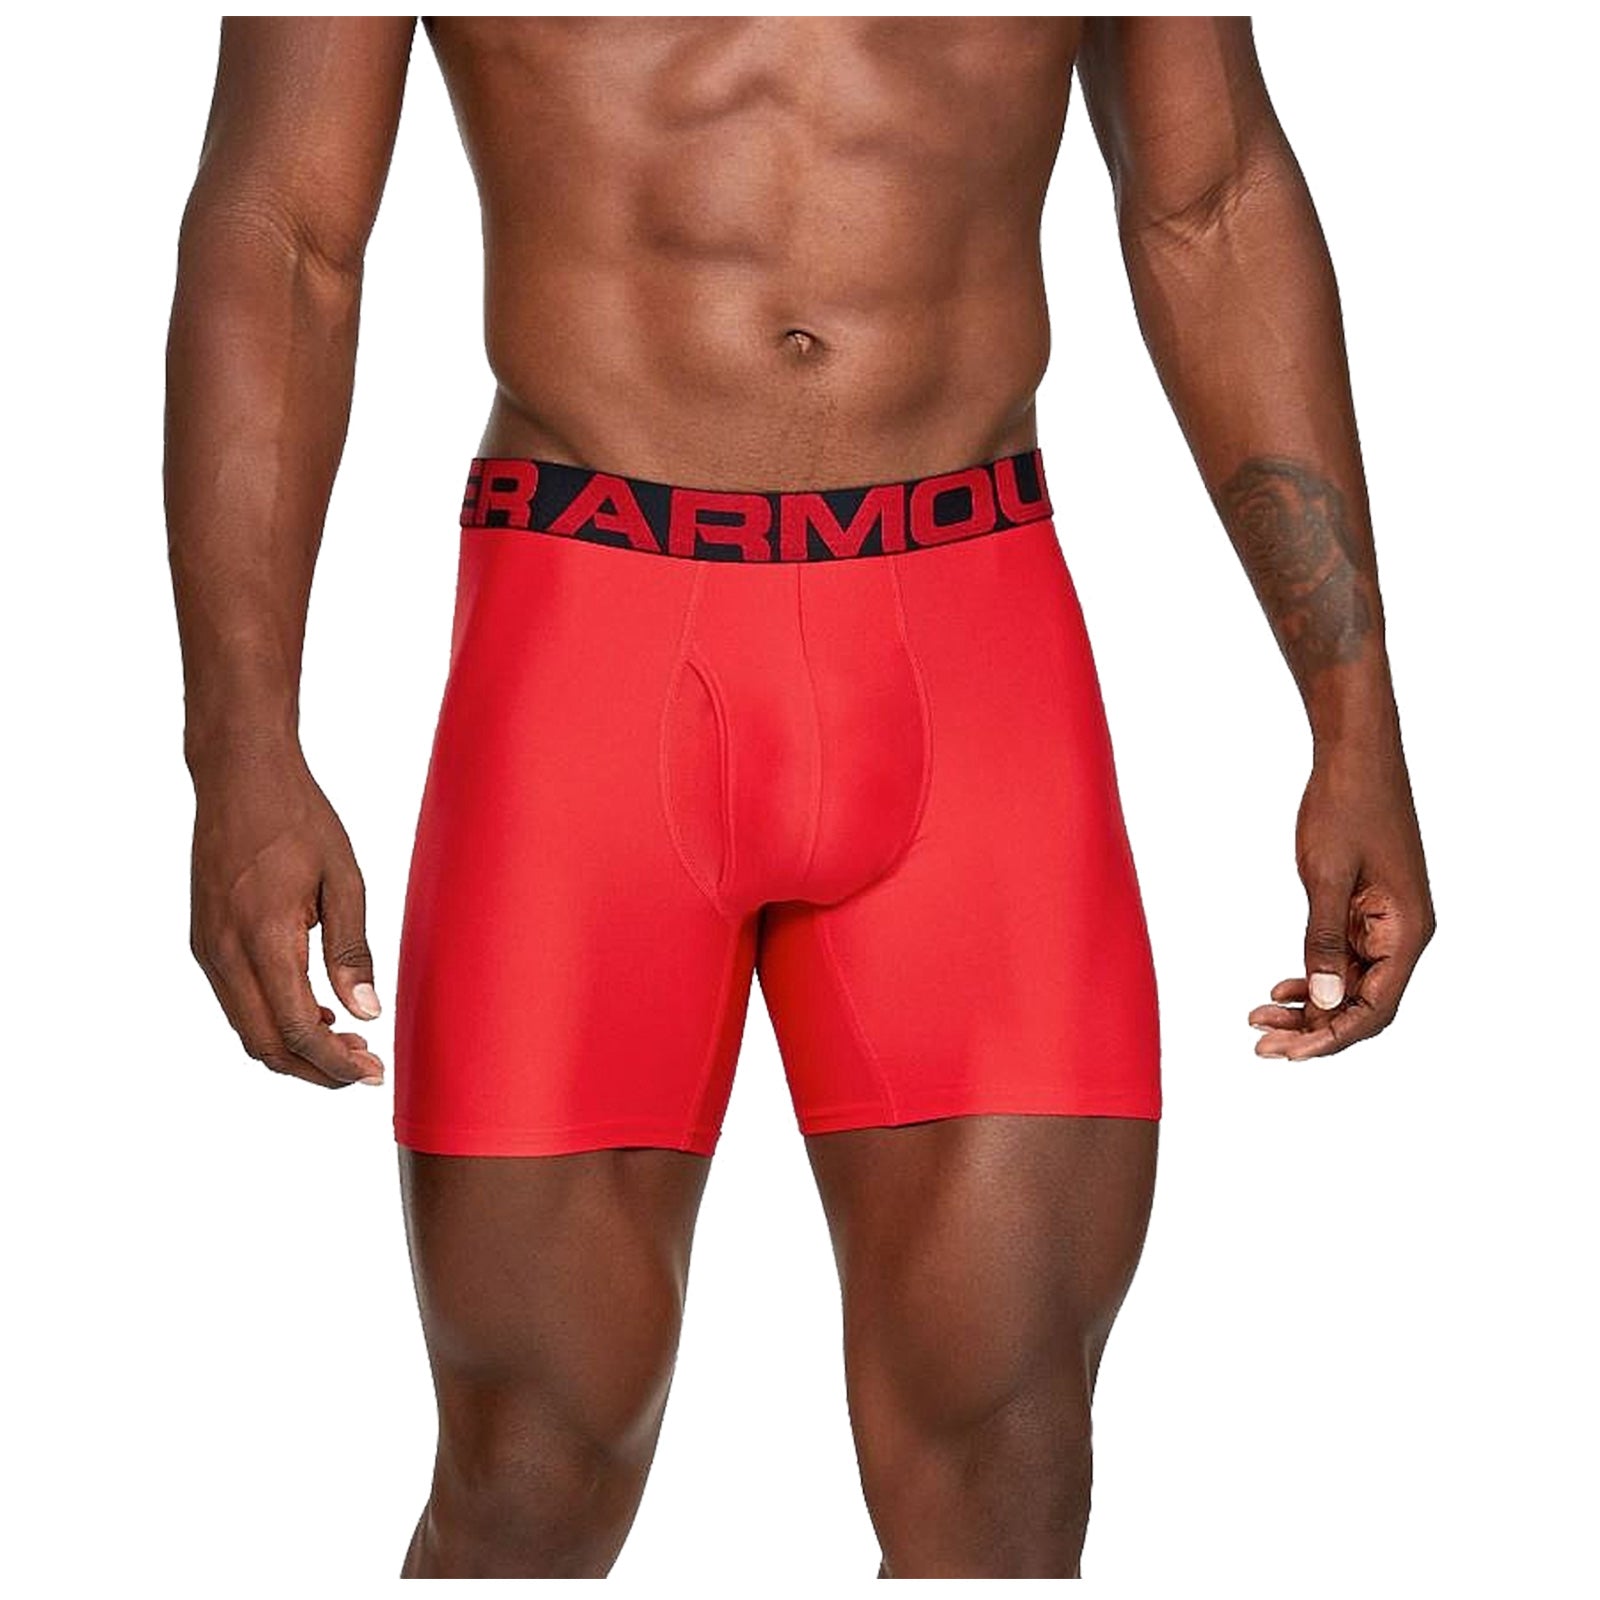 Under Armour Charged cotton Men's Boxer 3 pack (Black)-1363616-001